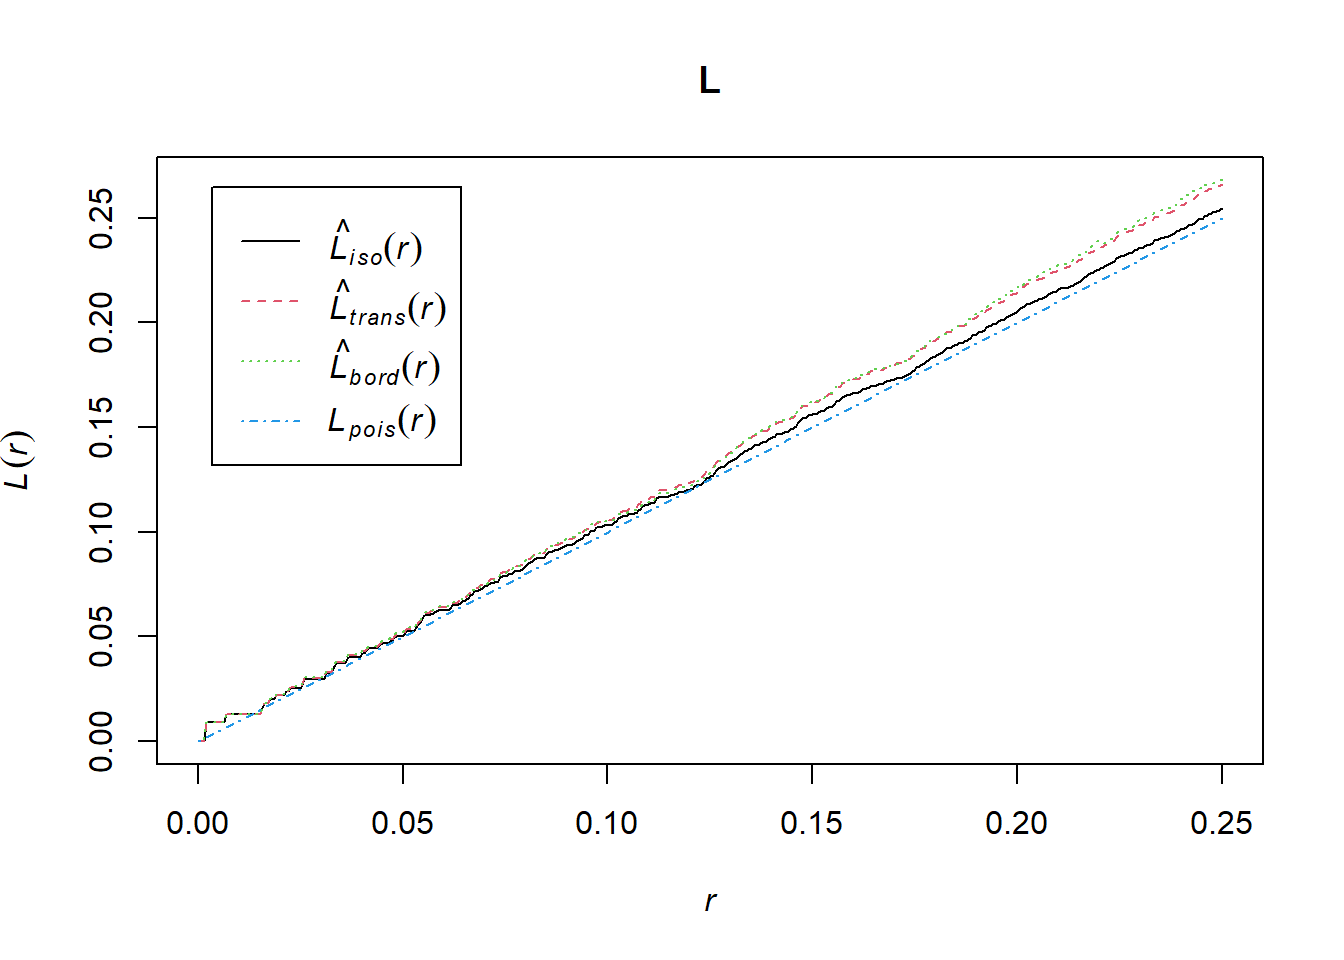 K-function (top) and L-function (bottom) corresponding to a simulated point pattern from a homogeneous Poisson process.